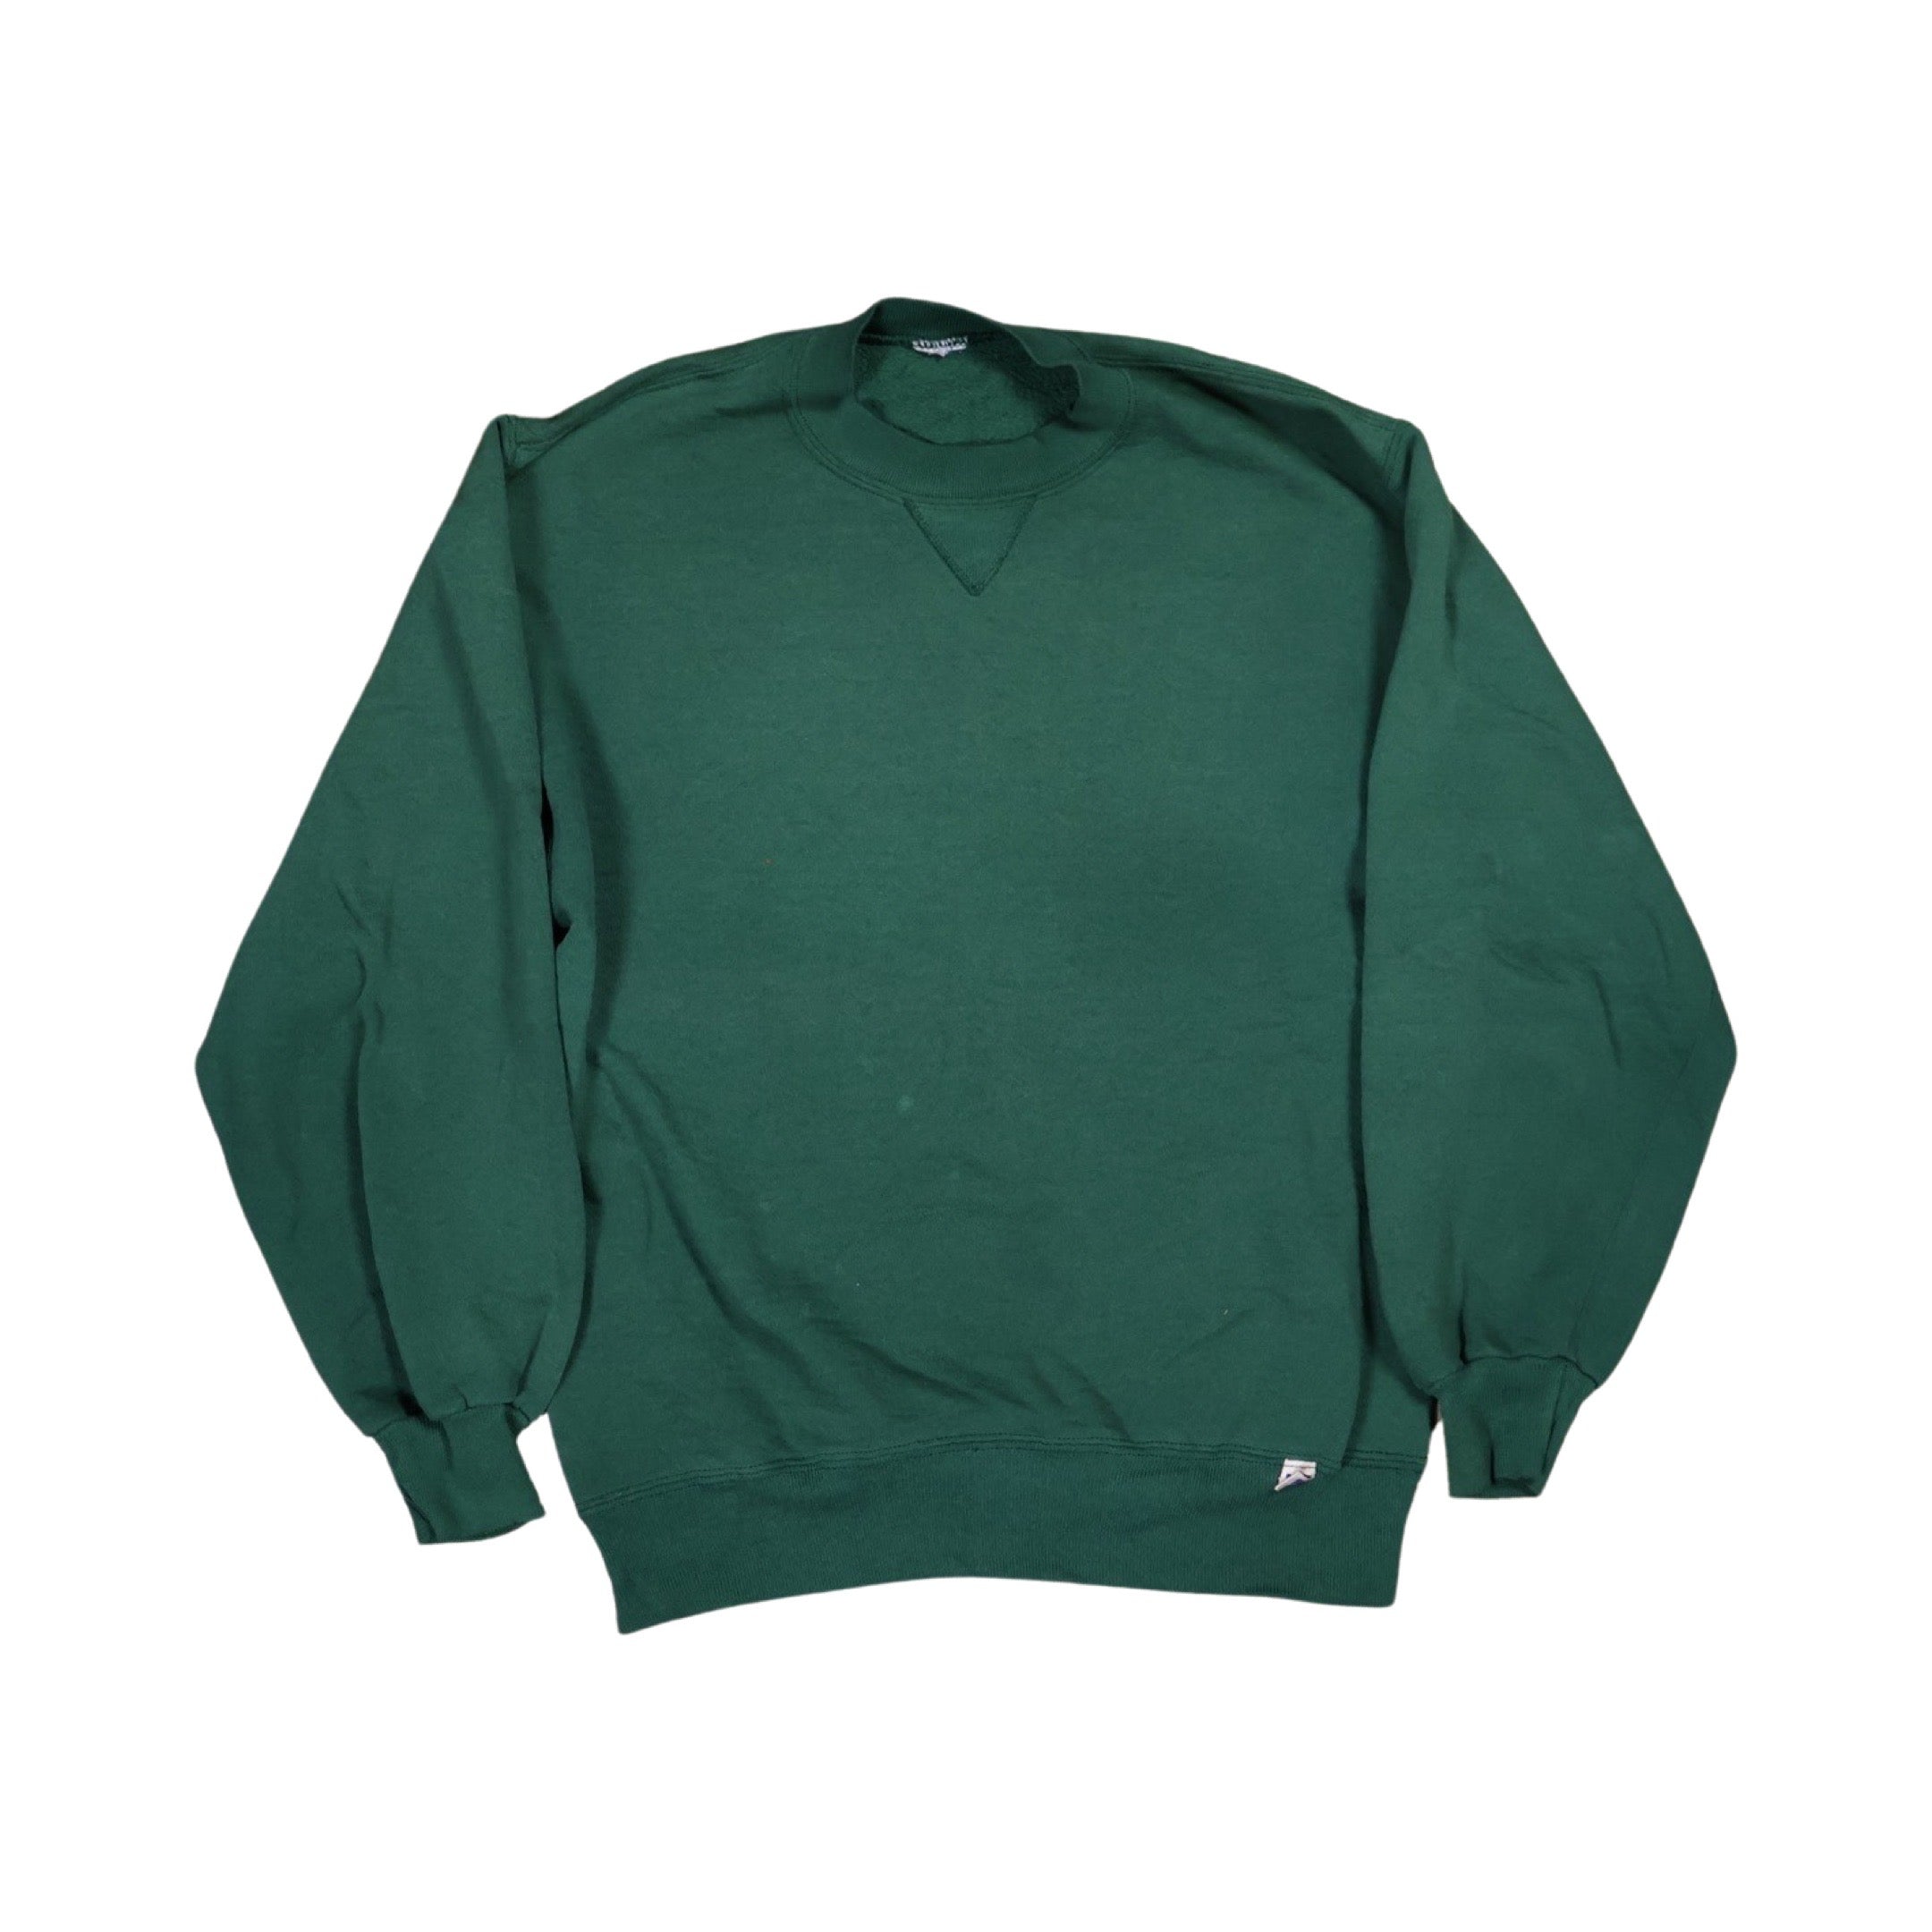 Green Russell 90s Sweater Essential (Small)